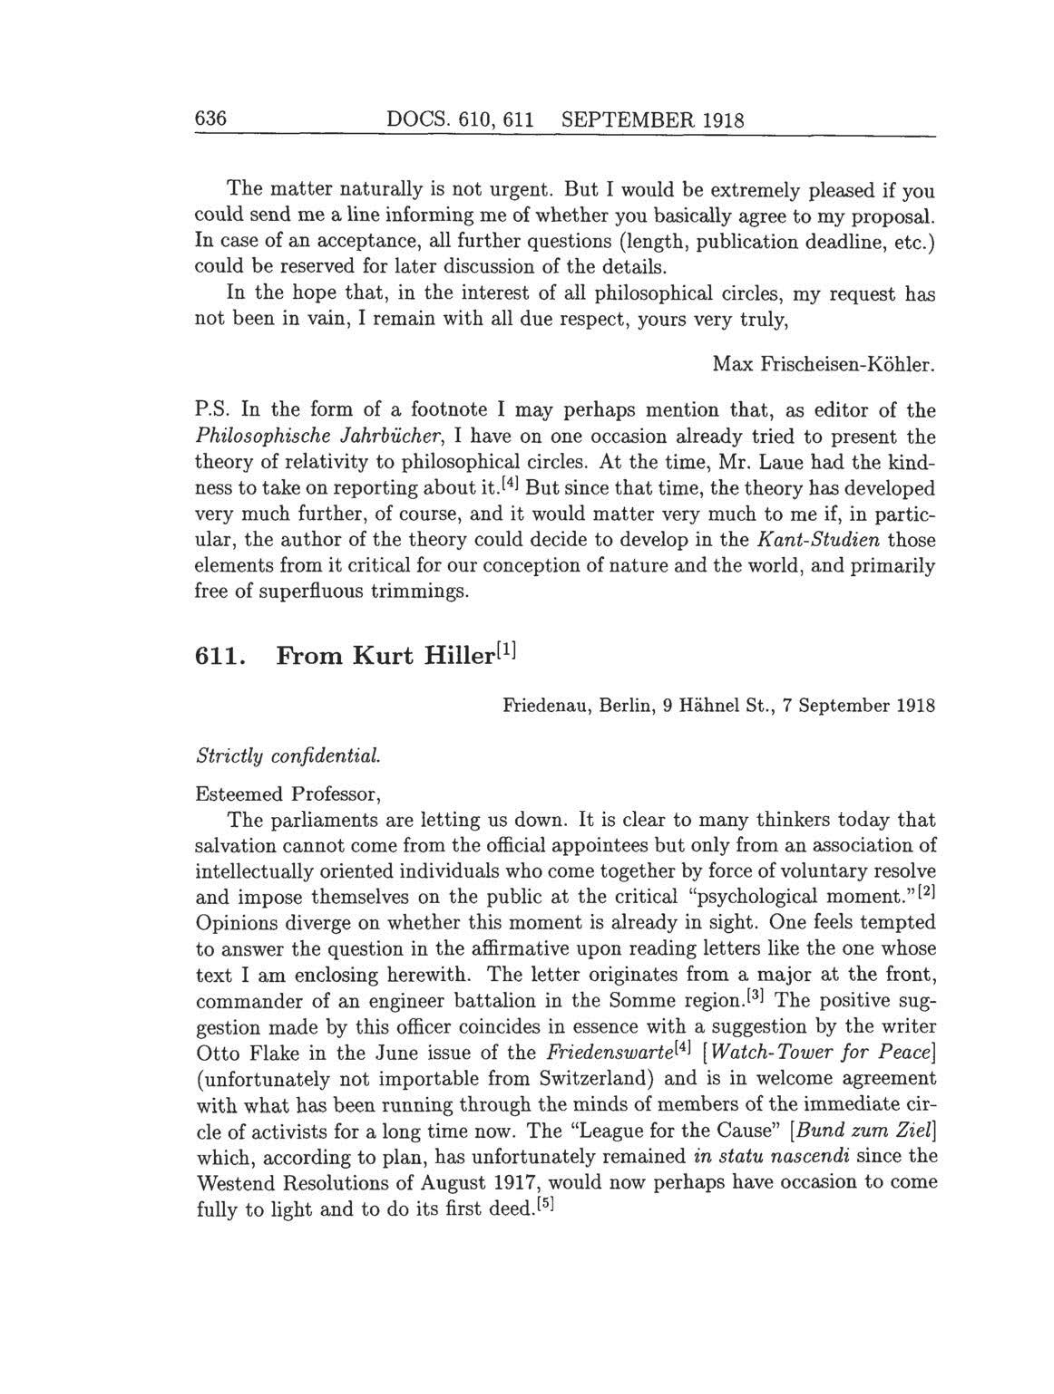 Volume 8: The Berlin Years: Correspondence, 1914-1918 (English translation supplement) page 636